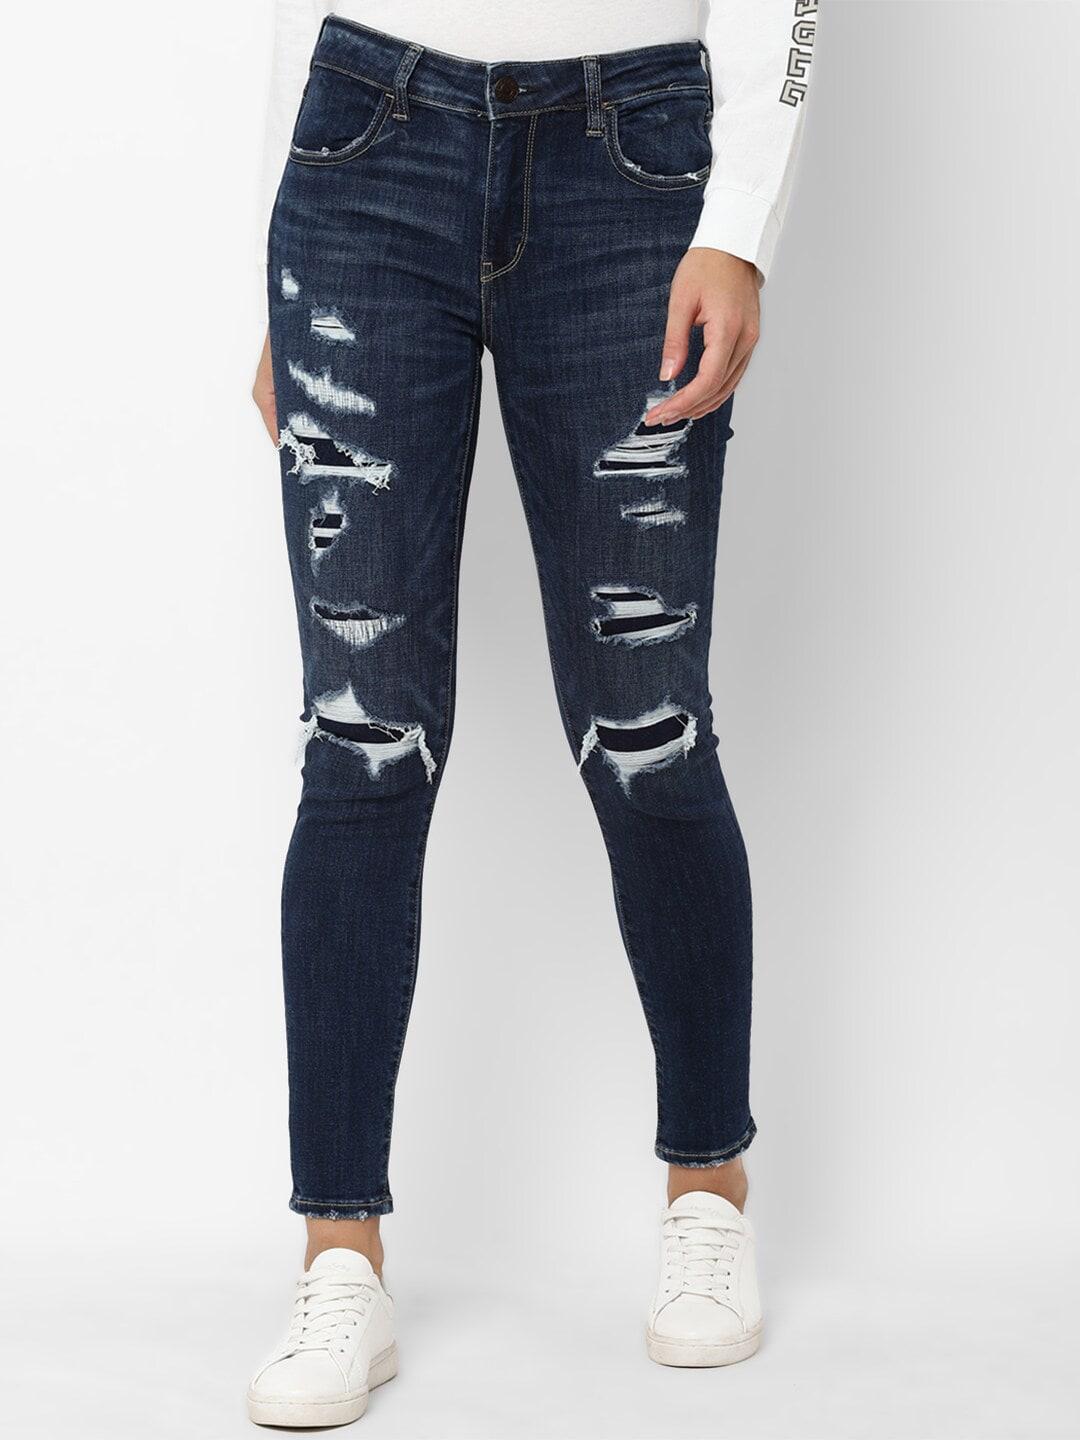 AMERICAN EAGLE OUTFITTERS Women Navy Blue Distressed Jeggings